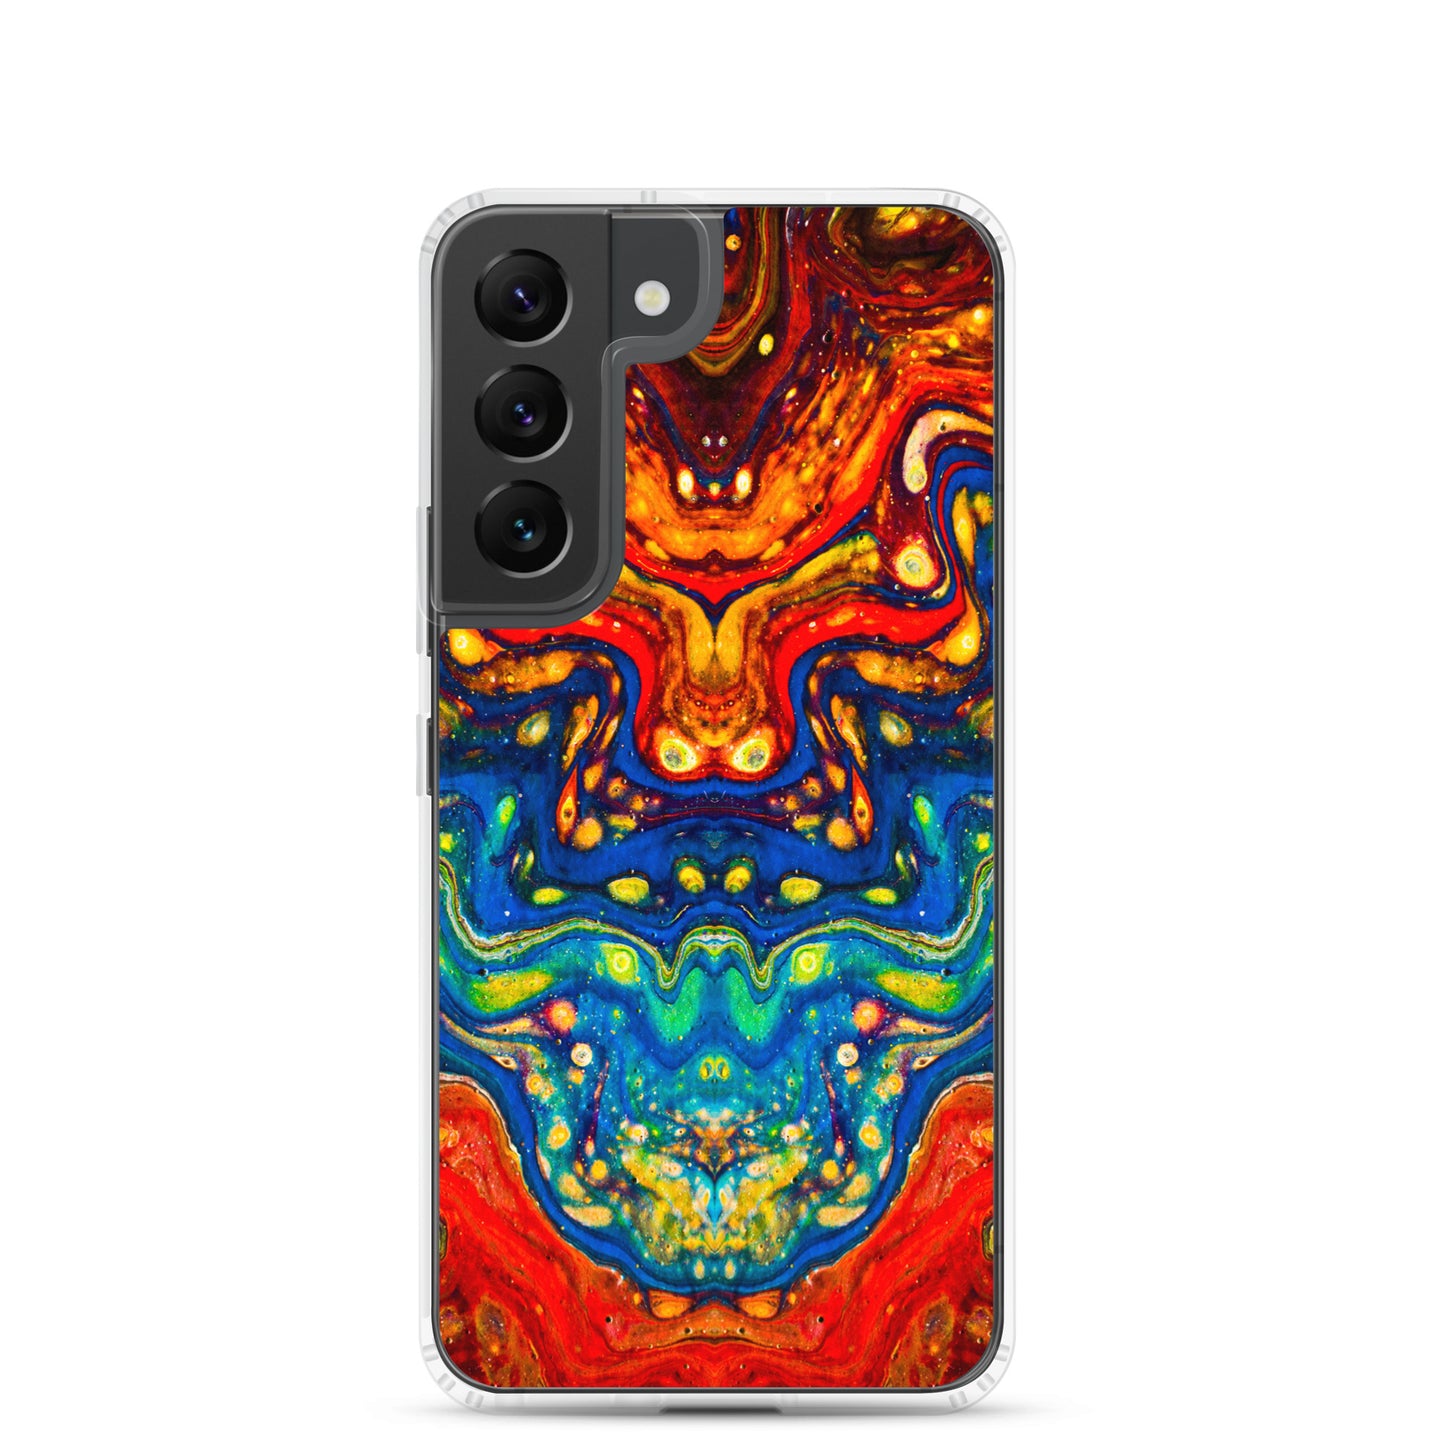 NightOwl Studio Custom Phone Case Compatible with Samsung Galaxy, Slim Cover for Wireless Charging, Drop and Scratch Resistant, Color Dragon